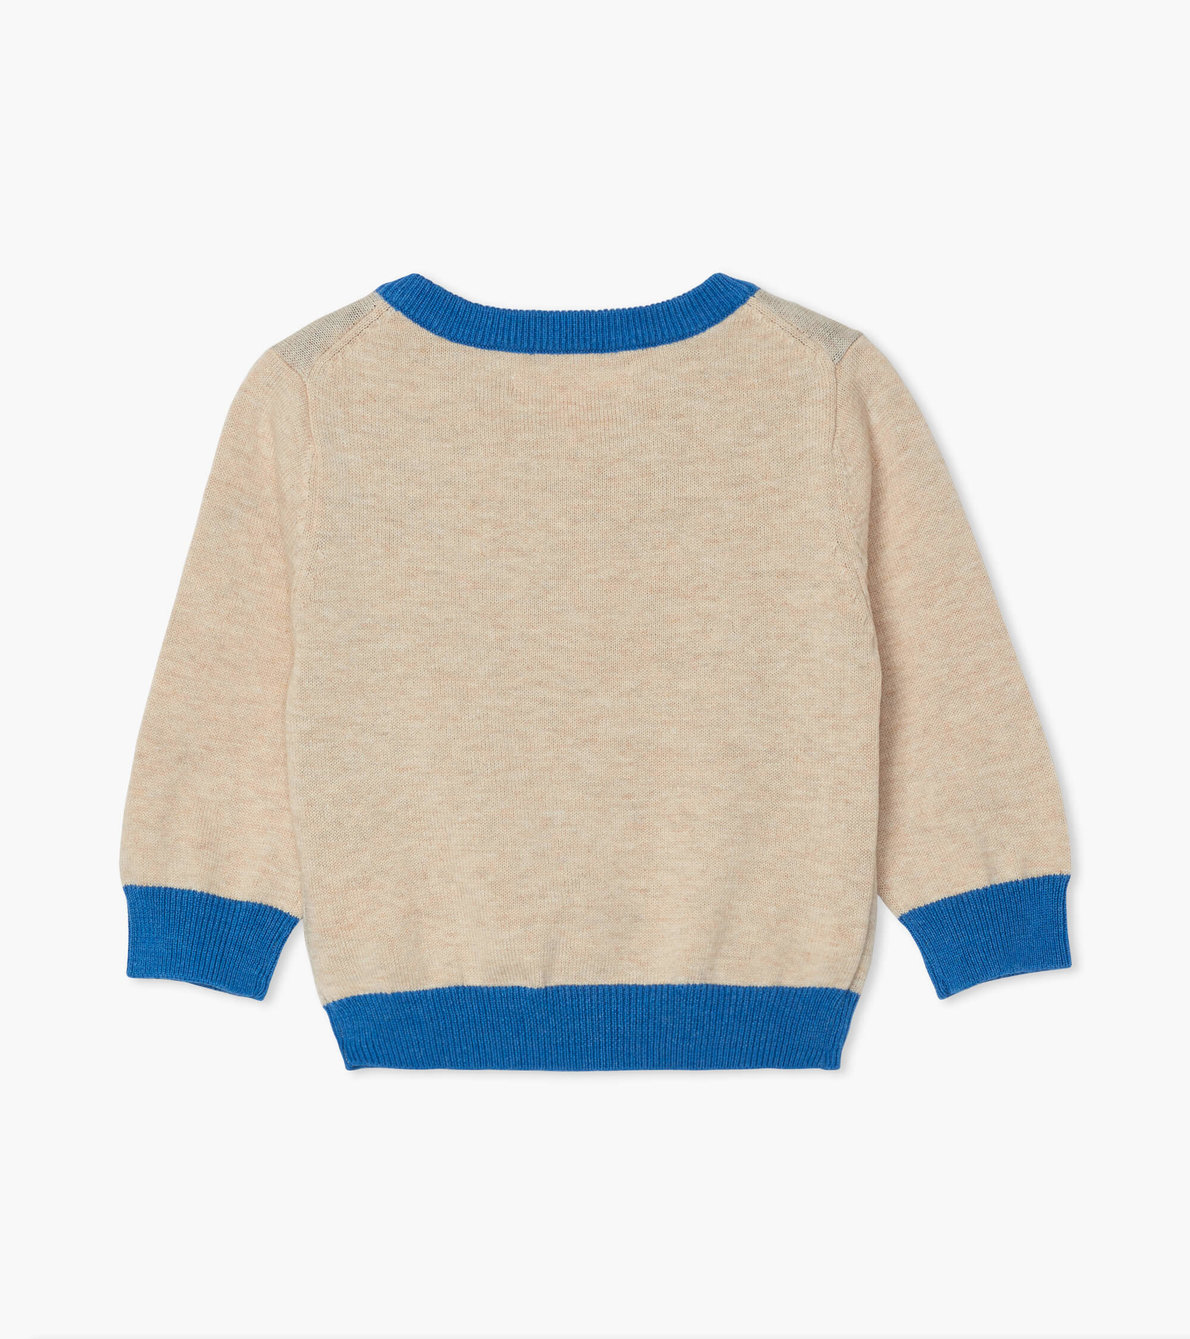 View larger image of Cheerful Bear V-Neck Baby Sweater